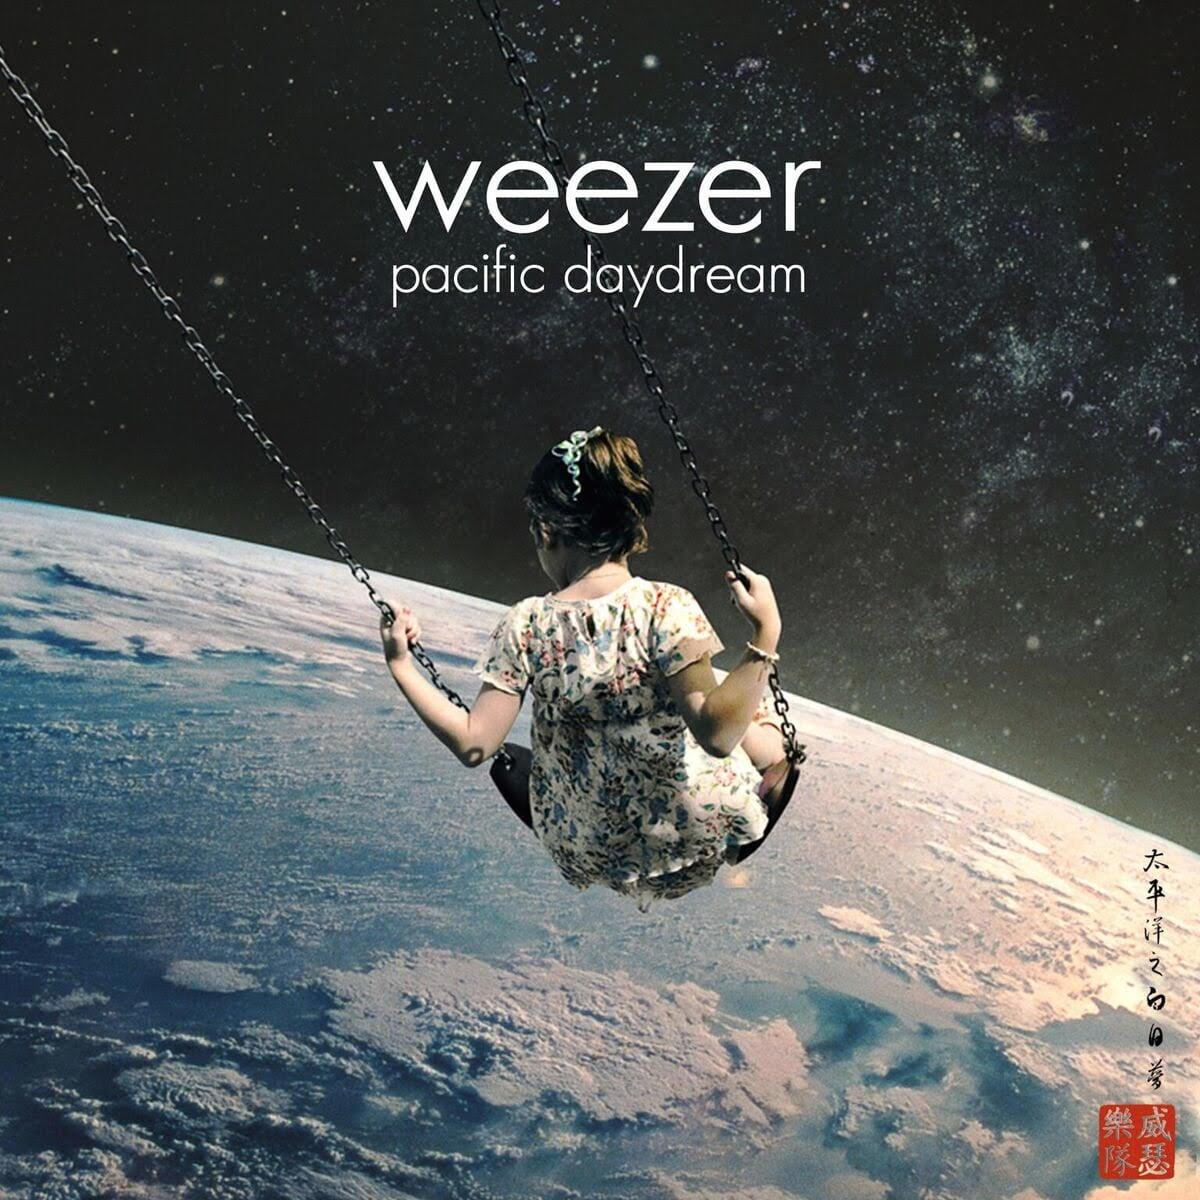 Album Review: Pacific Daydream by Weezer